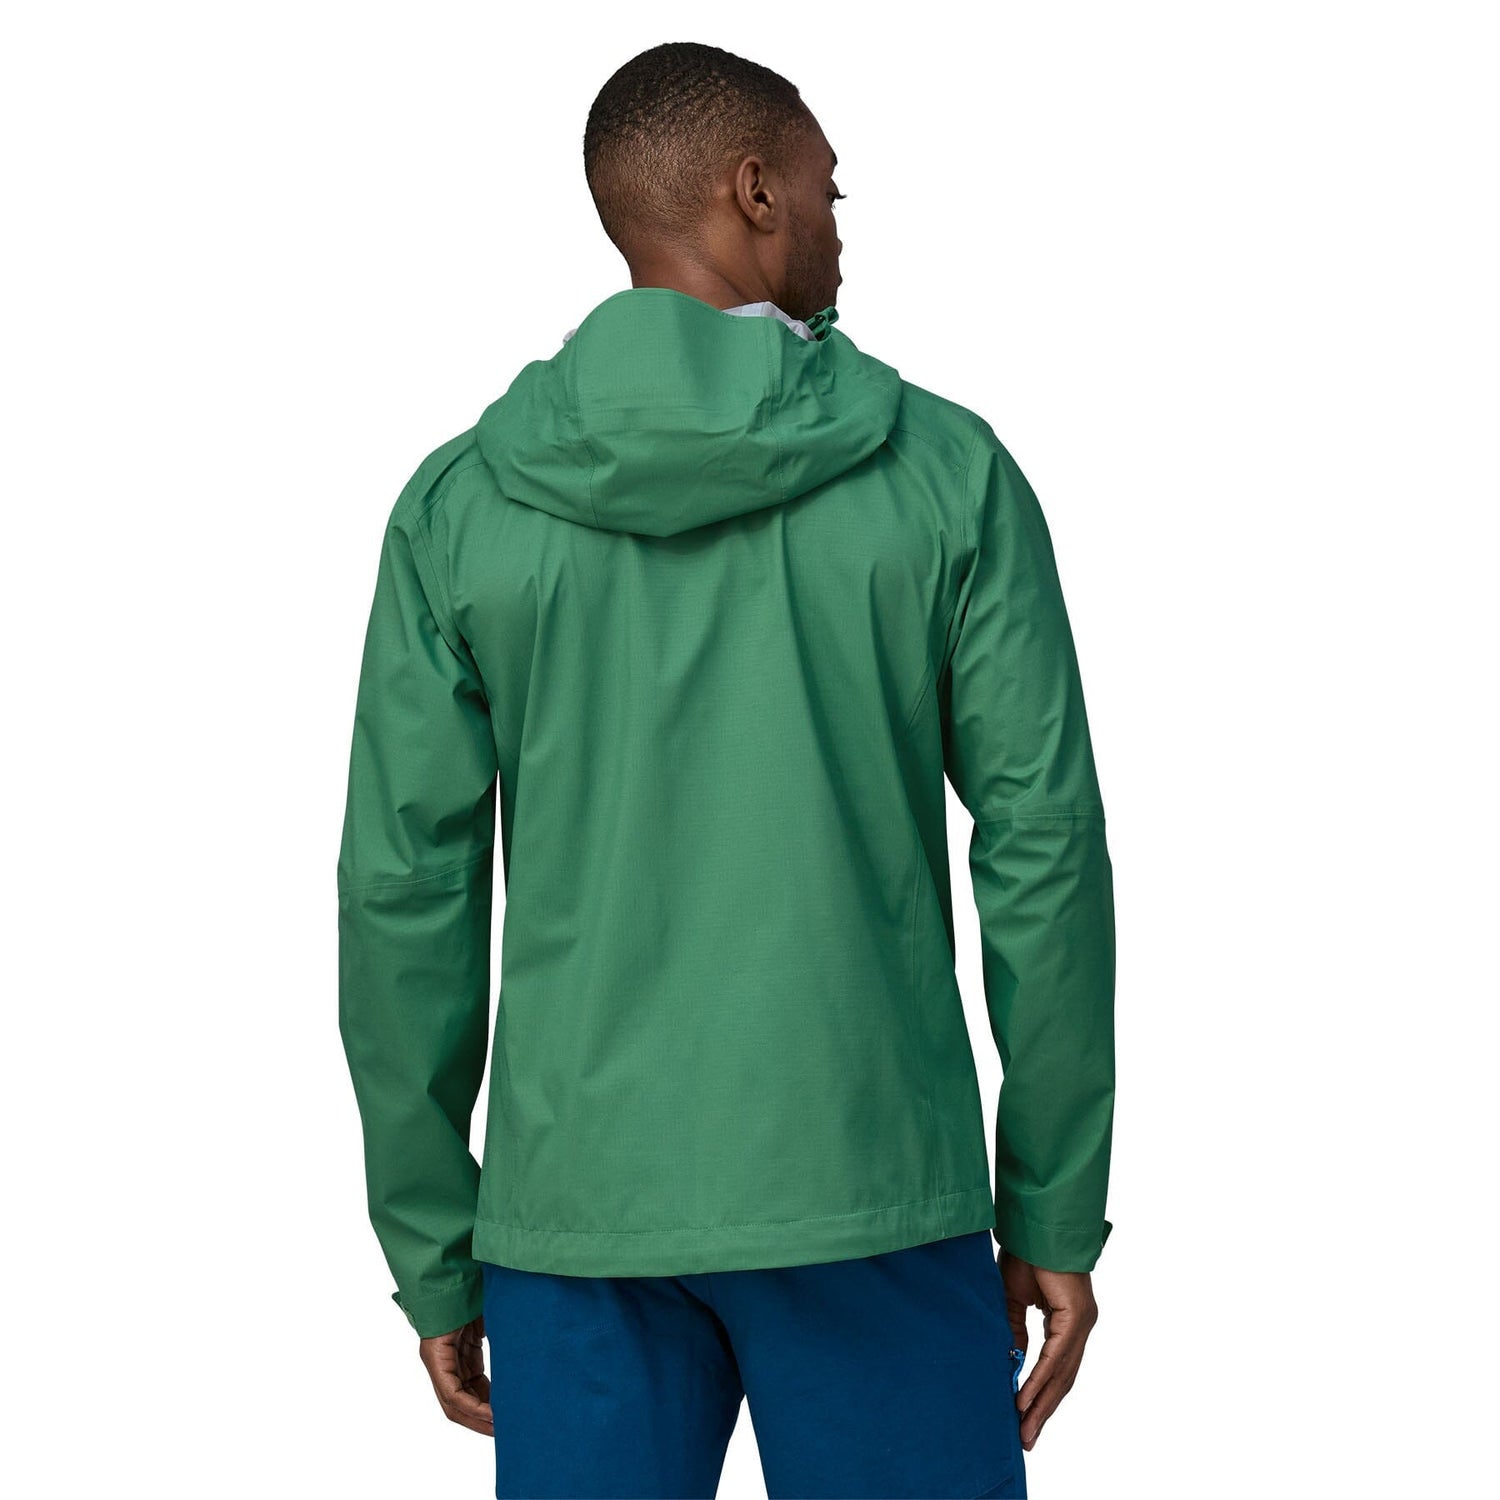 Patagonia M's Granite Crest Shell Jacket - 100% Recycled Nylon Gather Green Jacket